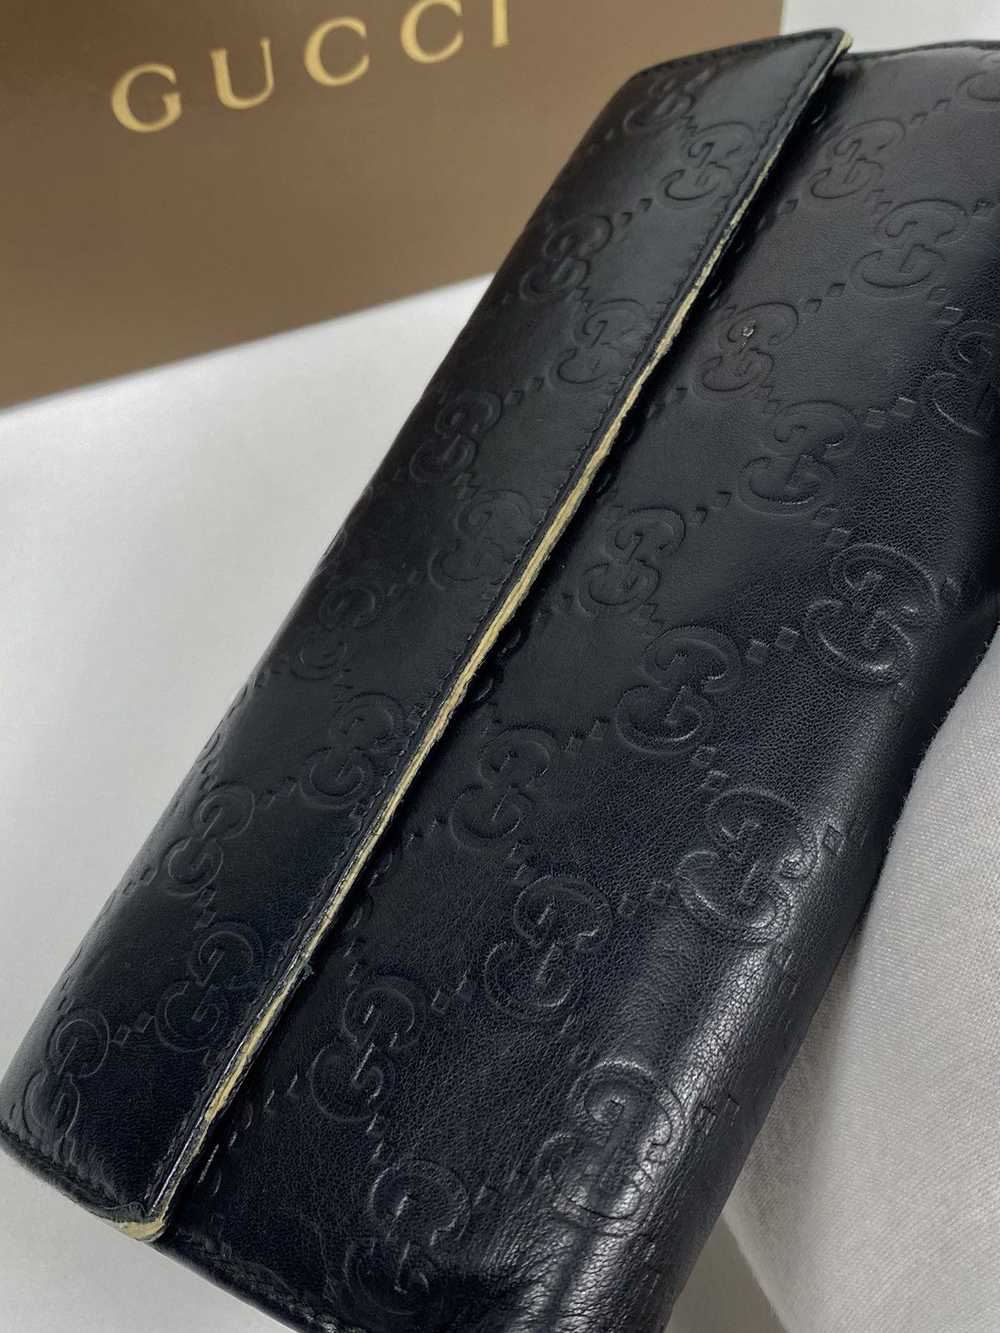 Gucci Gucci GG Guccissima leather long wallet - image 11